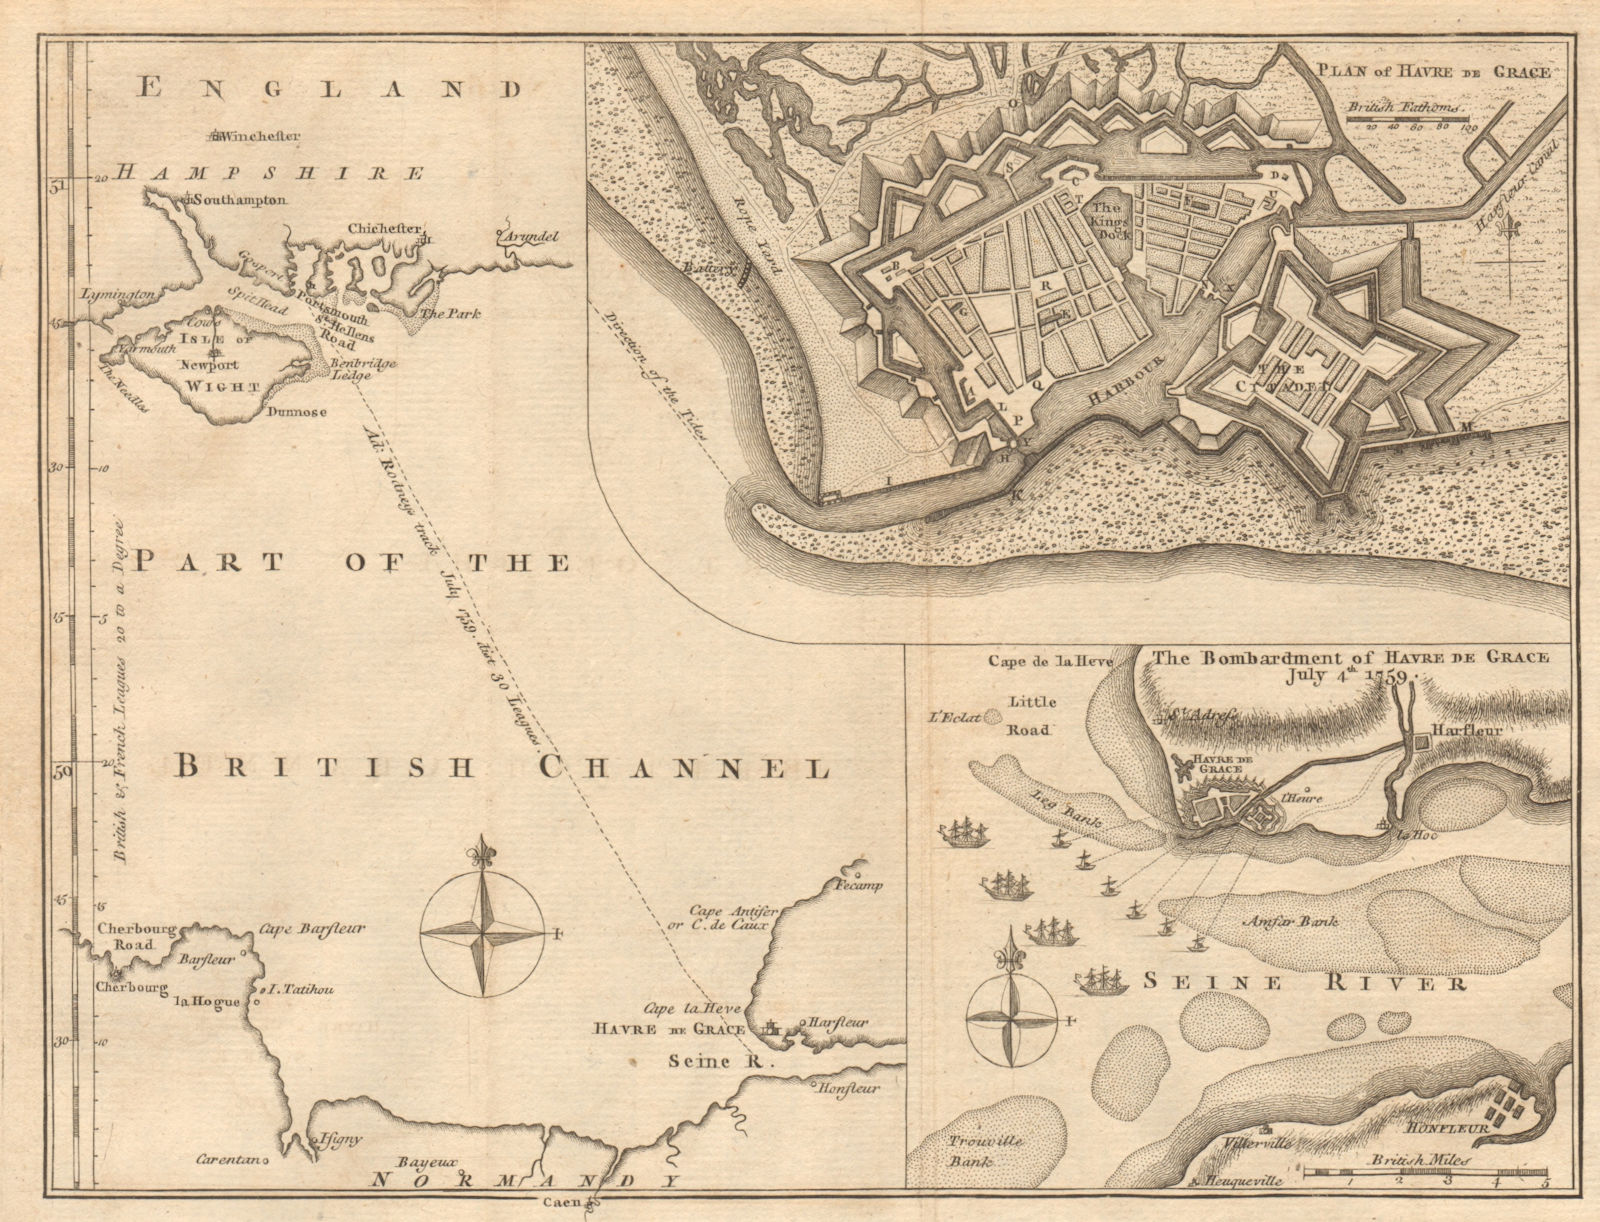 Plan of Havre de Grace. Le Havre raid 1759 by Admiral Rodney. GENTS MAG 1759 map